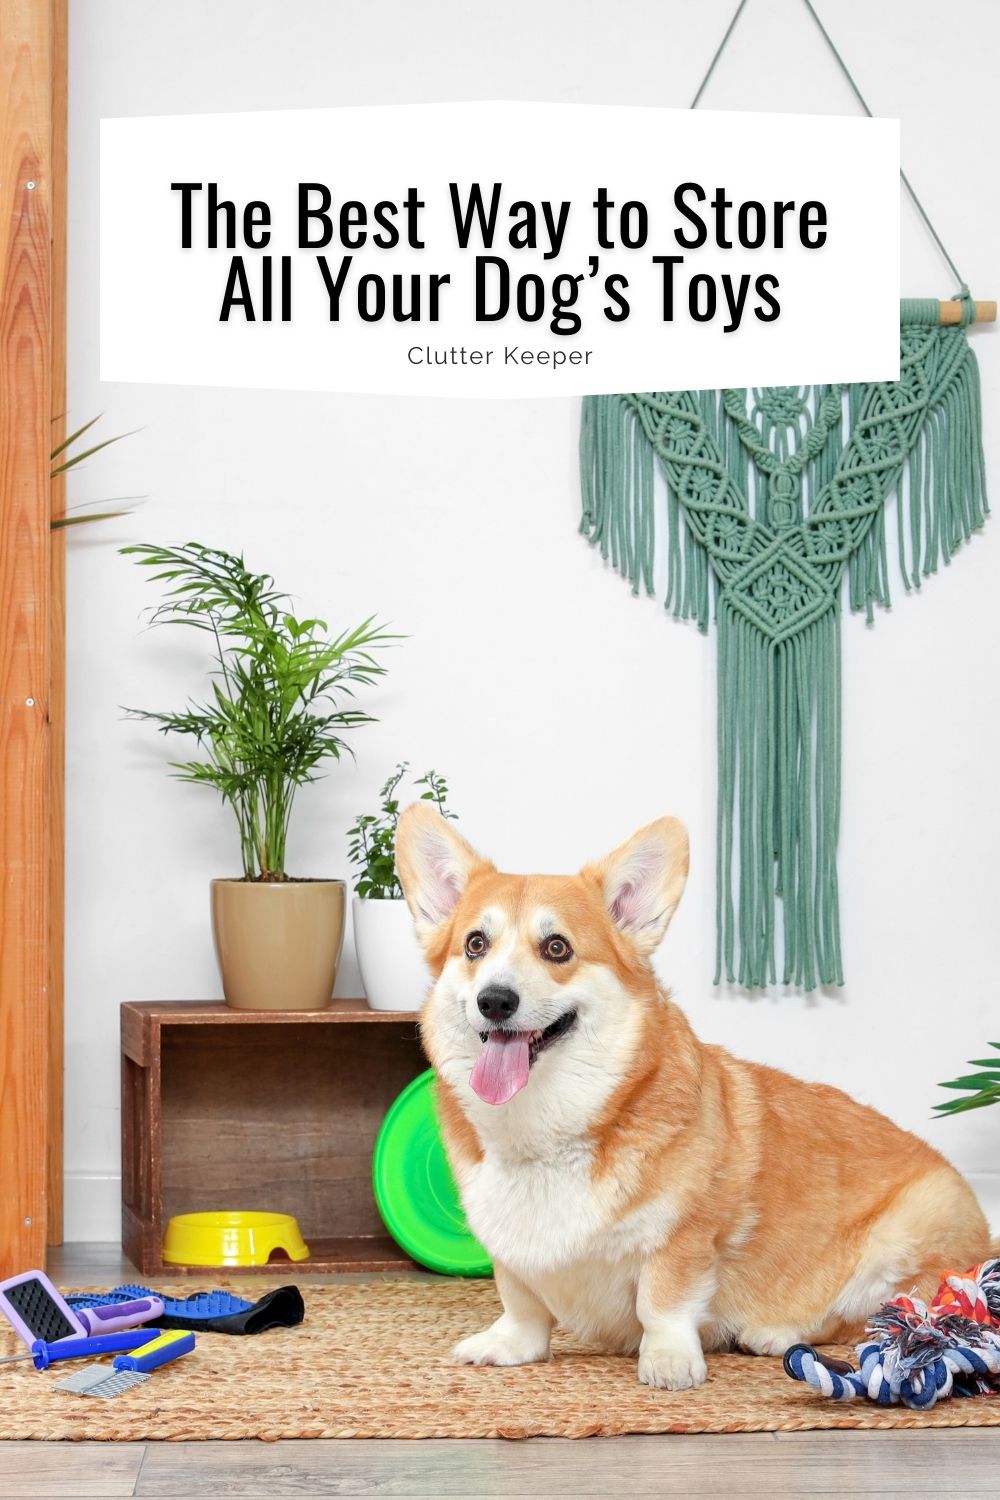 The best way to store all your dog's toys.